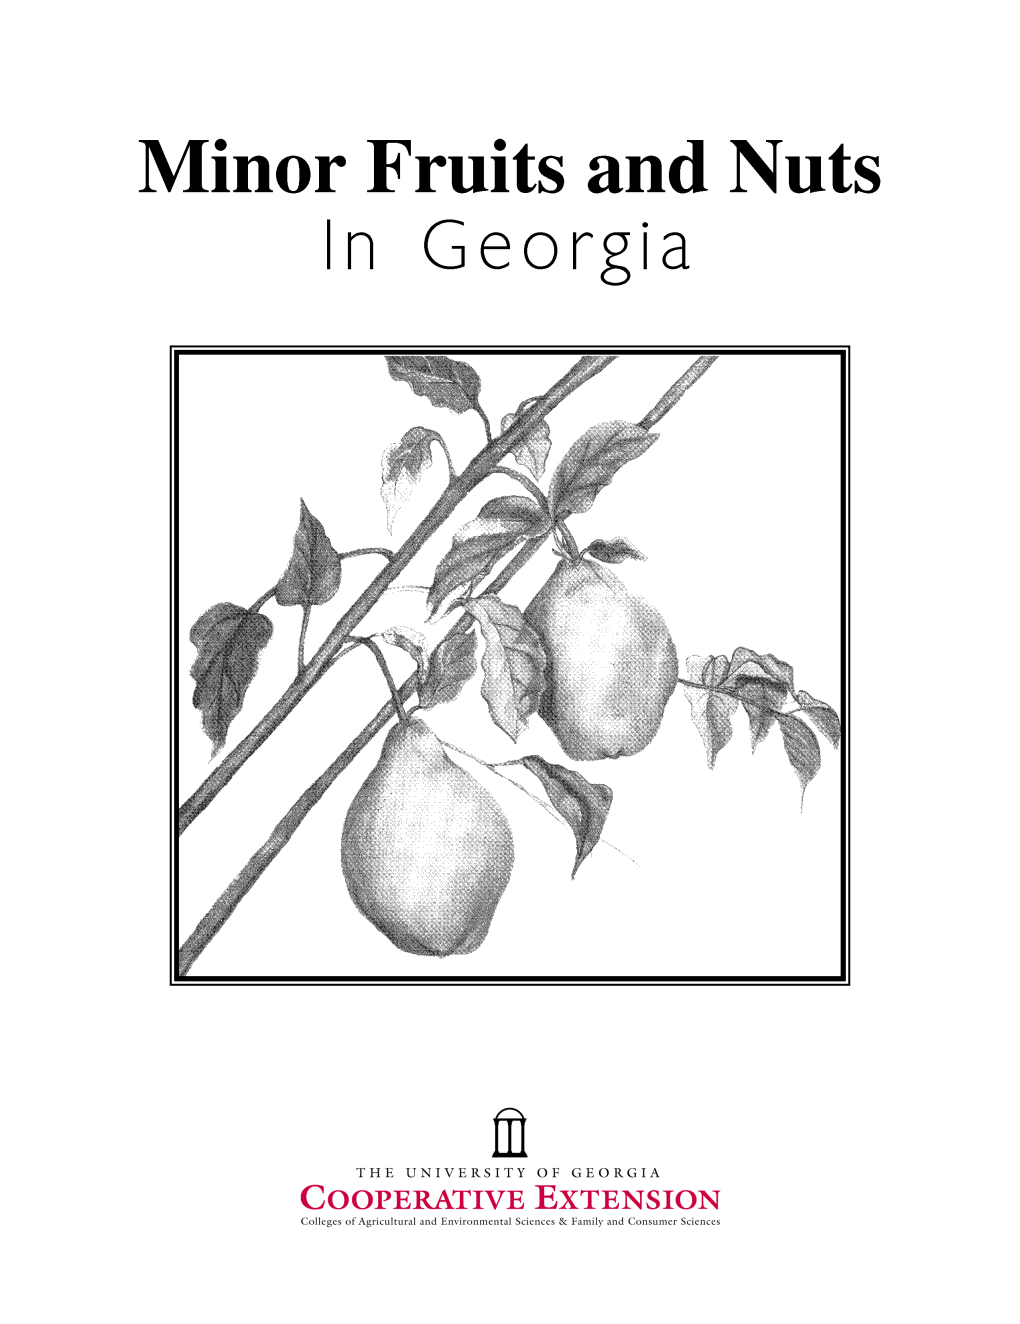 Minor Fruits and Nuts in Georgia